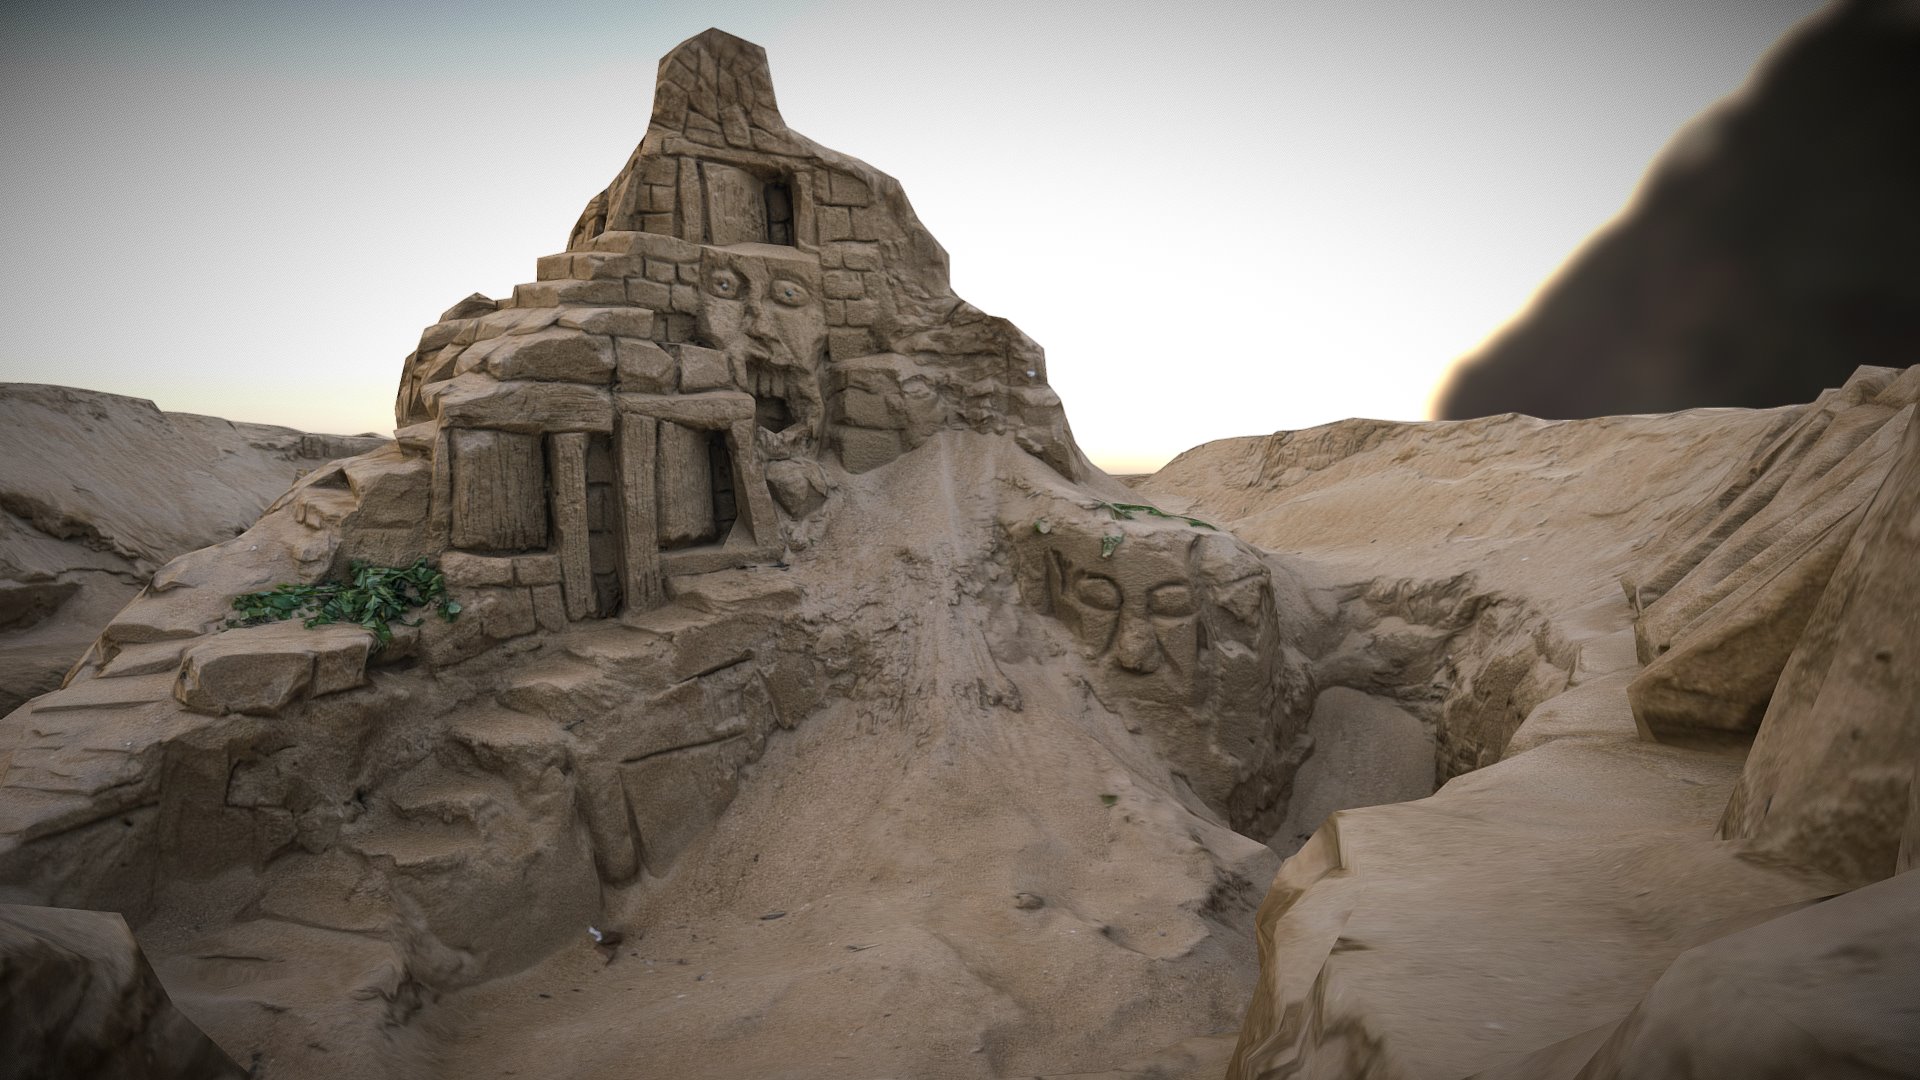 3D model Sand sculpture photogrammetry scan - This is a 3D model of the Sand sculpture photogrammetry scan. The 3D model is about a stone building on a rocky hill.